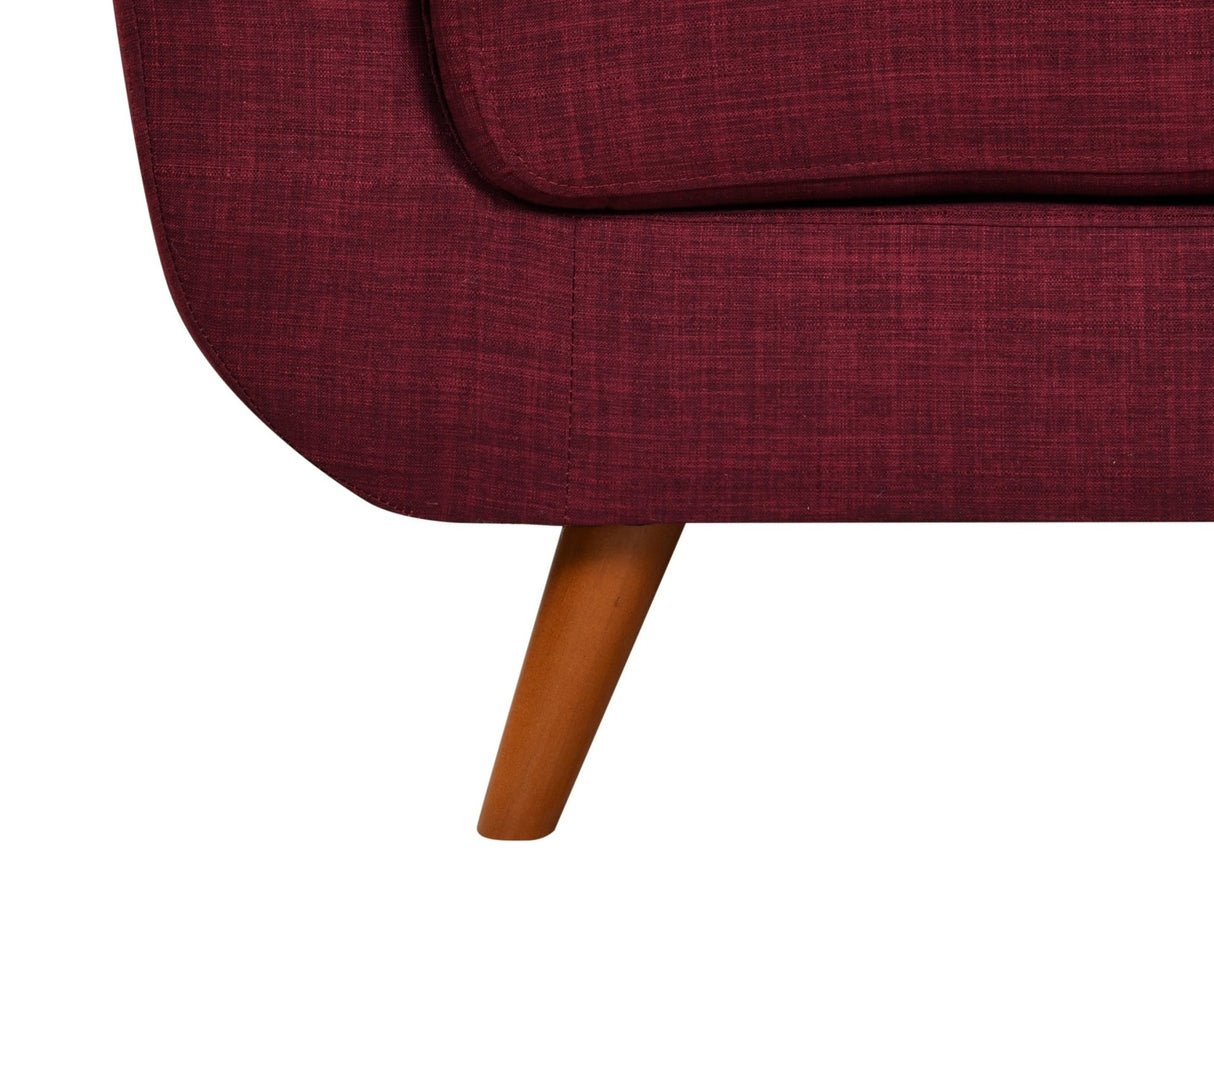 41”Linen Fabric Accent Chair, Mid Century Modern Armchair for Living Room, Bedroom Button Tufted Upholstered Comfy Reading Accent Sofa Chairs, Wine Red - Home Elegance USA